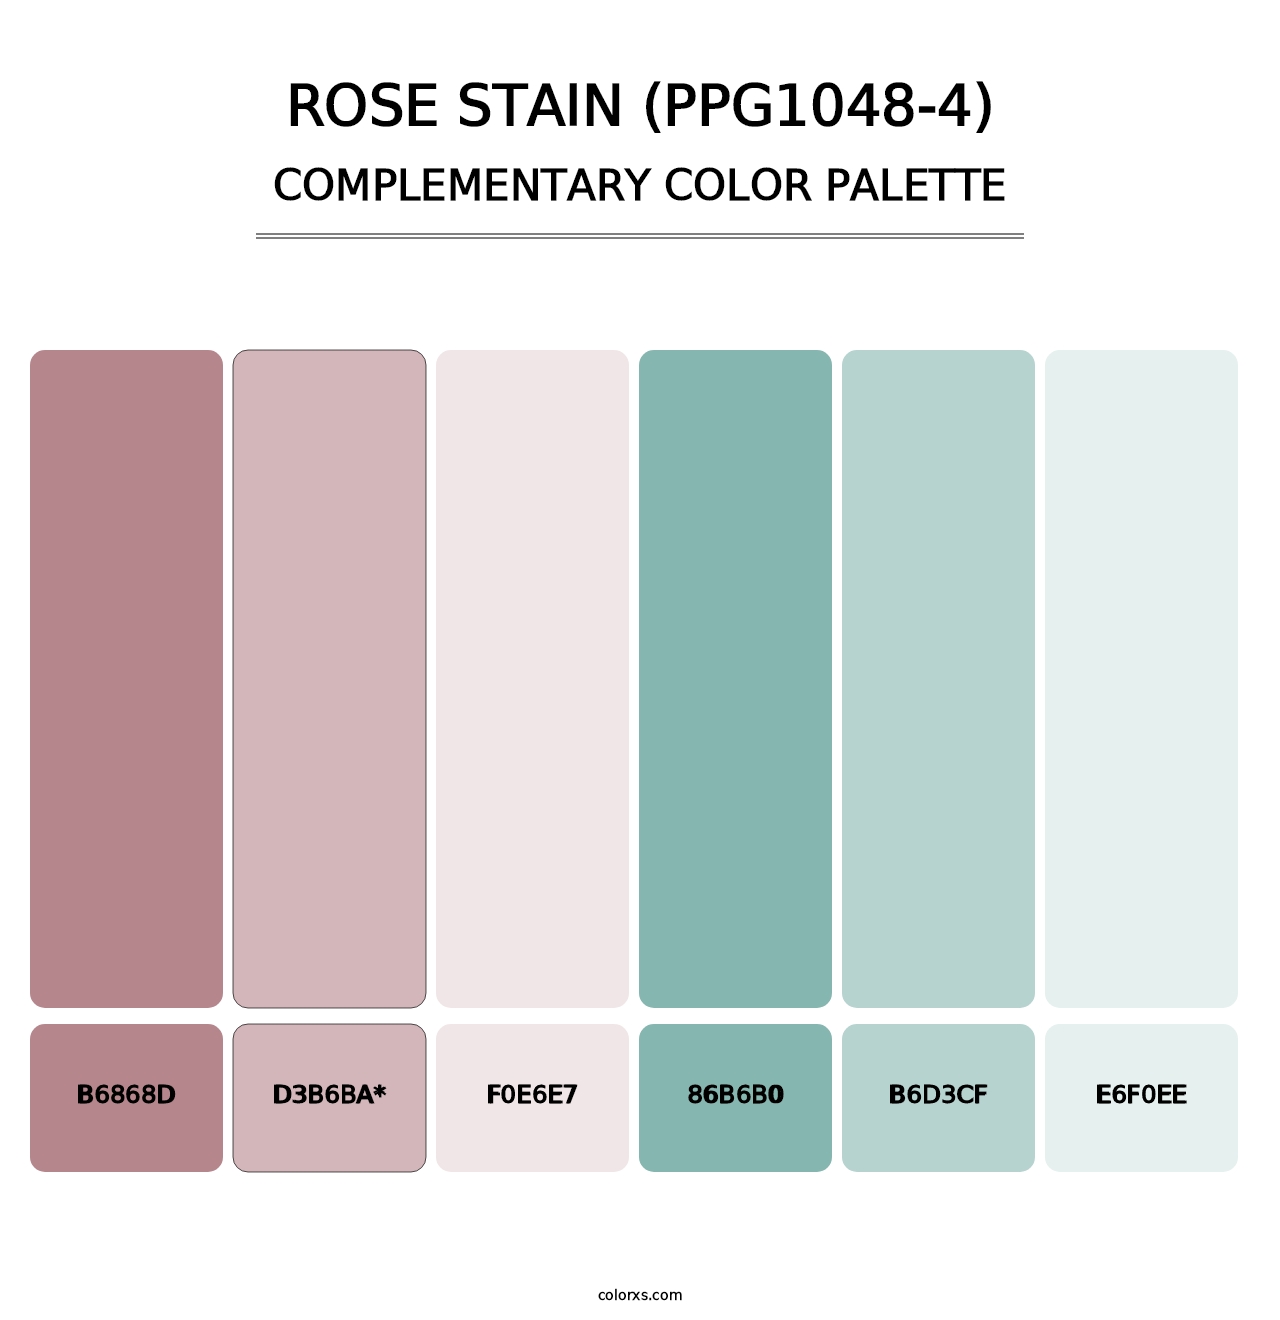 Rose Stain (PPG1048-4) - Complementary Color Palette